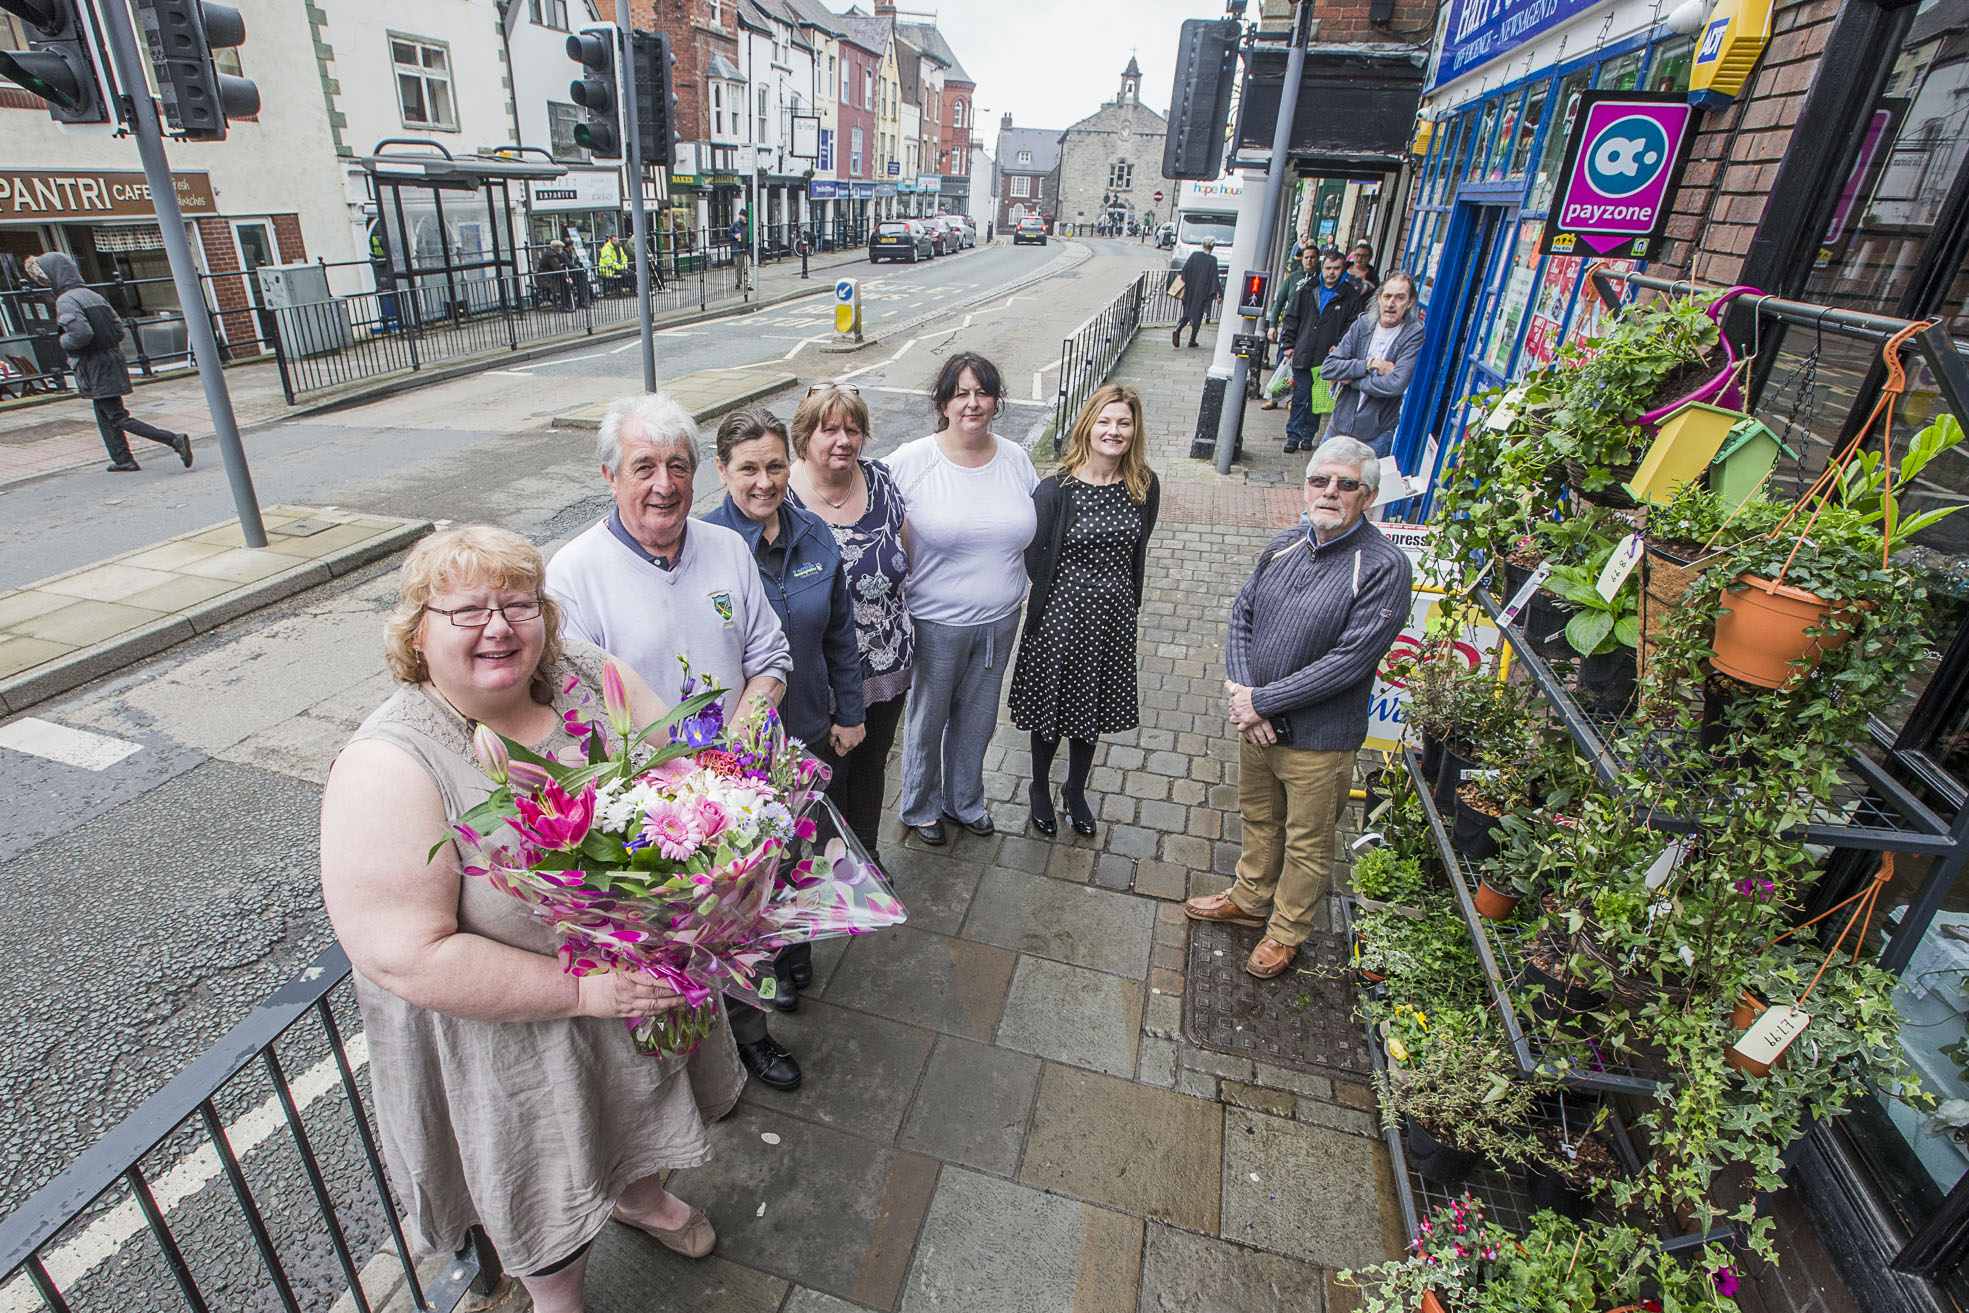 Denbigh is blooming marvellous